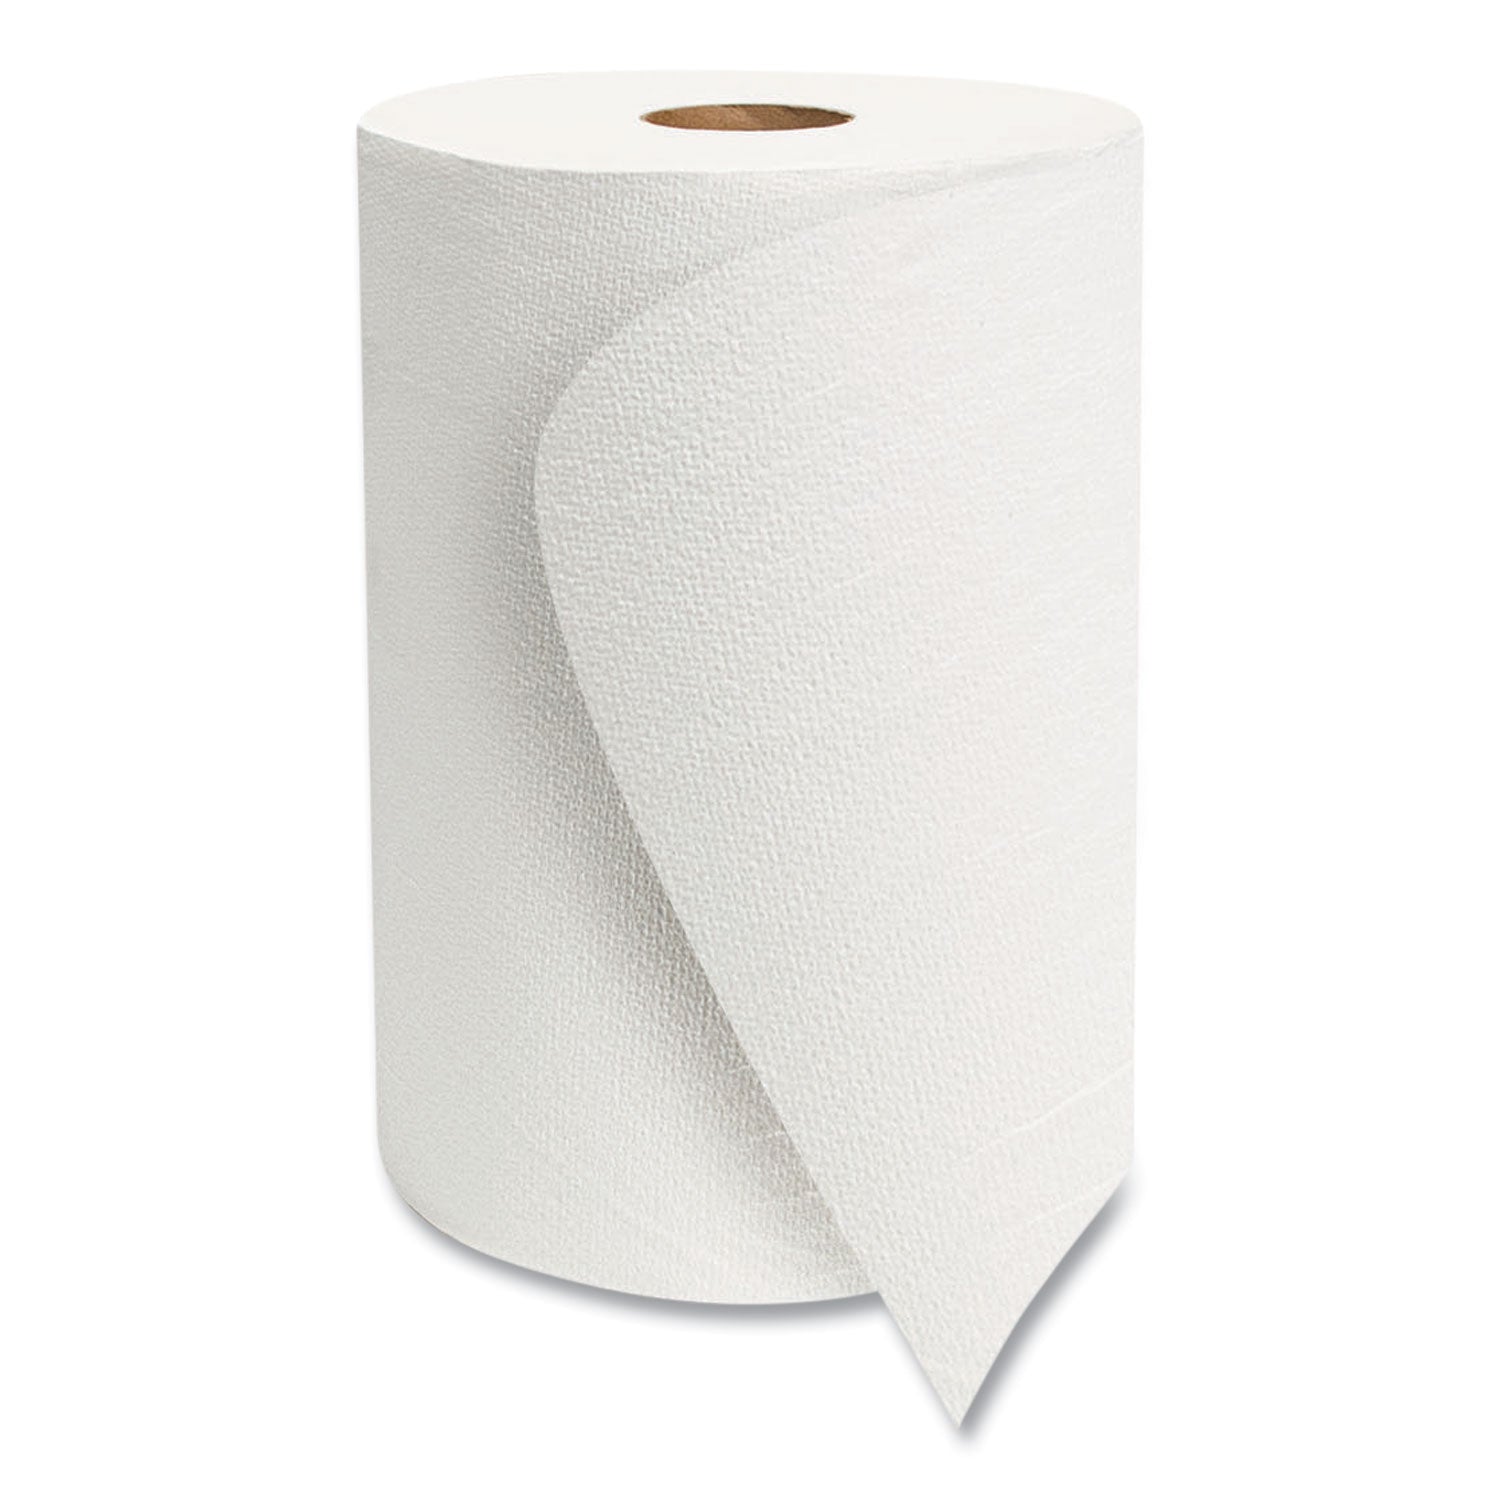 10-inch-tad-roll-towels-1-ply-10-x-550-ft-white-6-rolls-carton_morvt106 - 6